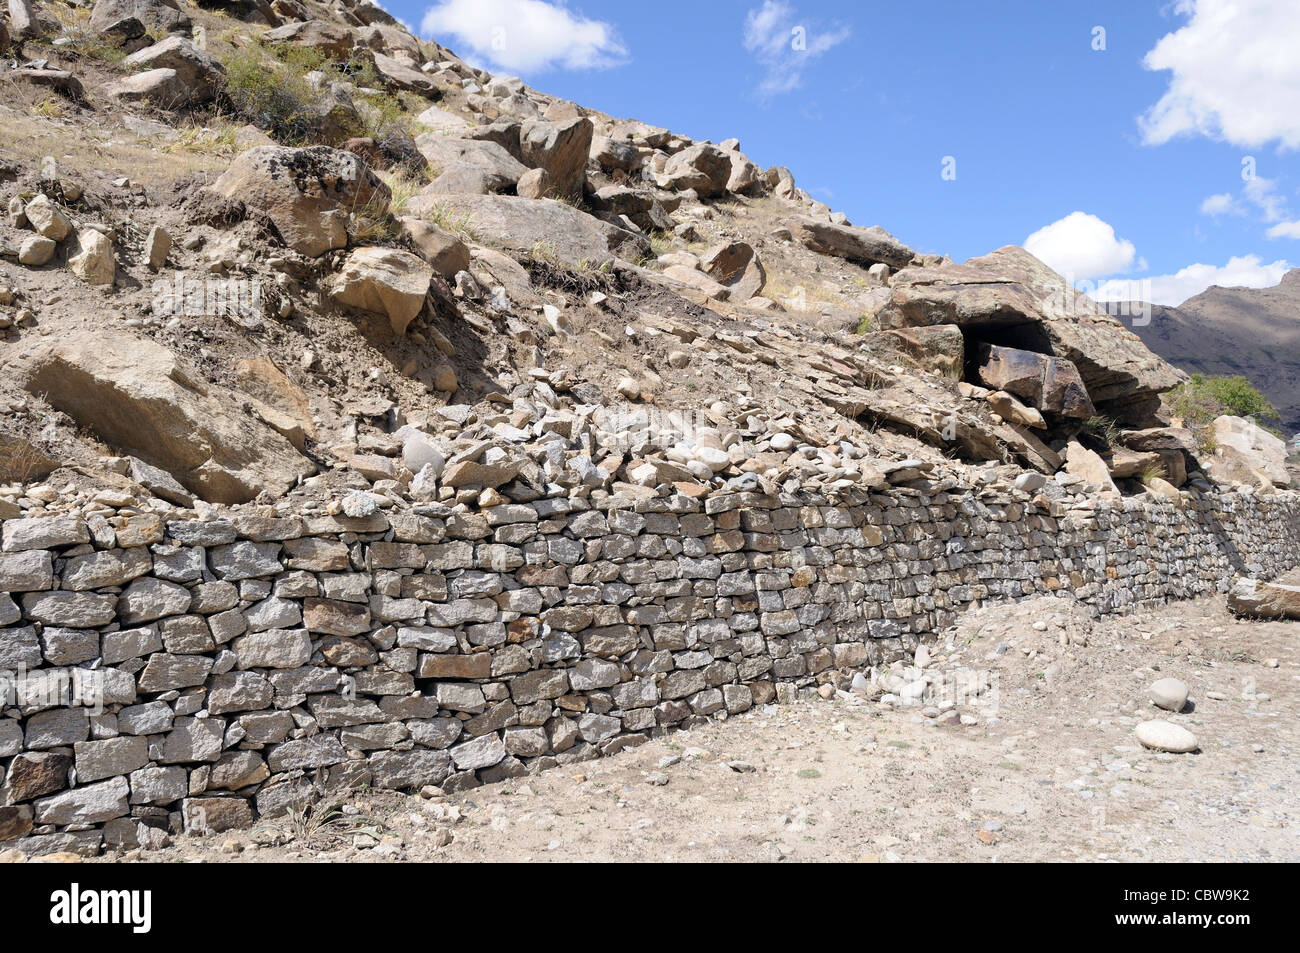 A dry stone wall made of dressed stone holds back the mountainside above the road to Rangdum. Zanscar, Ladakh, India Stock Photo